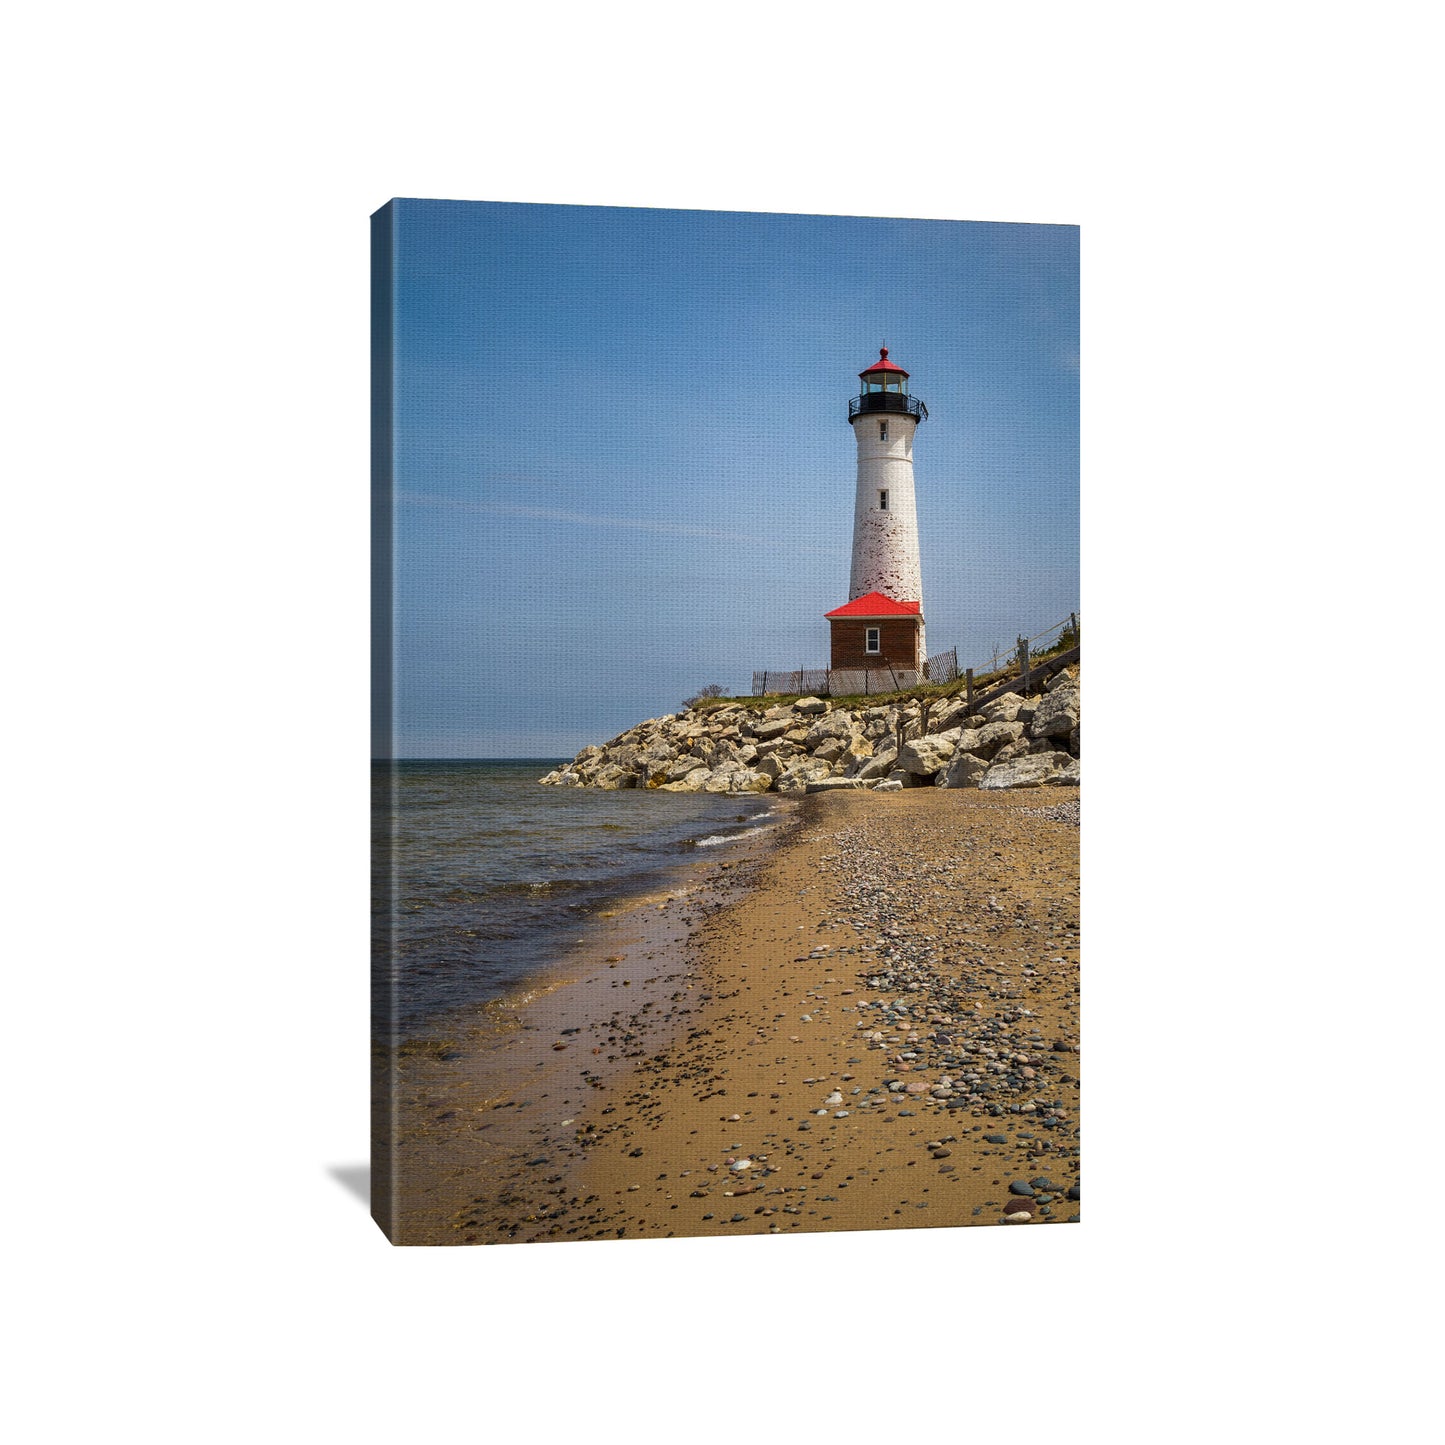 A high-resolution photography canvas print of Crisp Point Lighthouse with its white tower and red-roofed lantern room, against a blue sky beside a rocky lake shore.